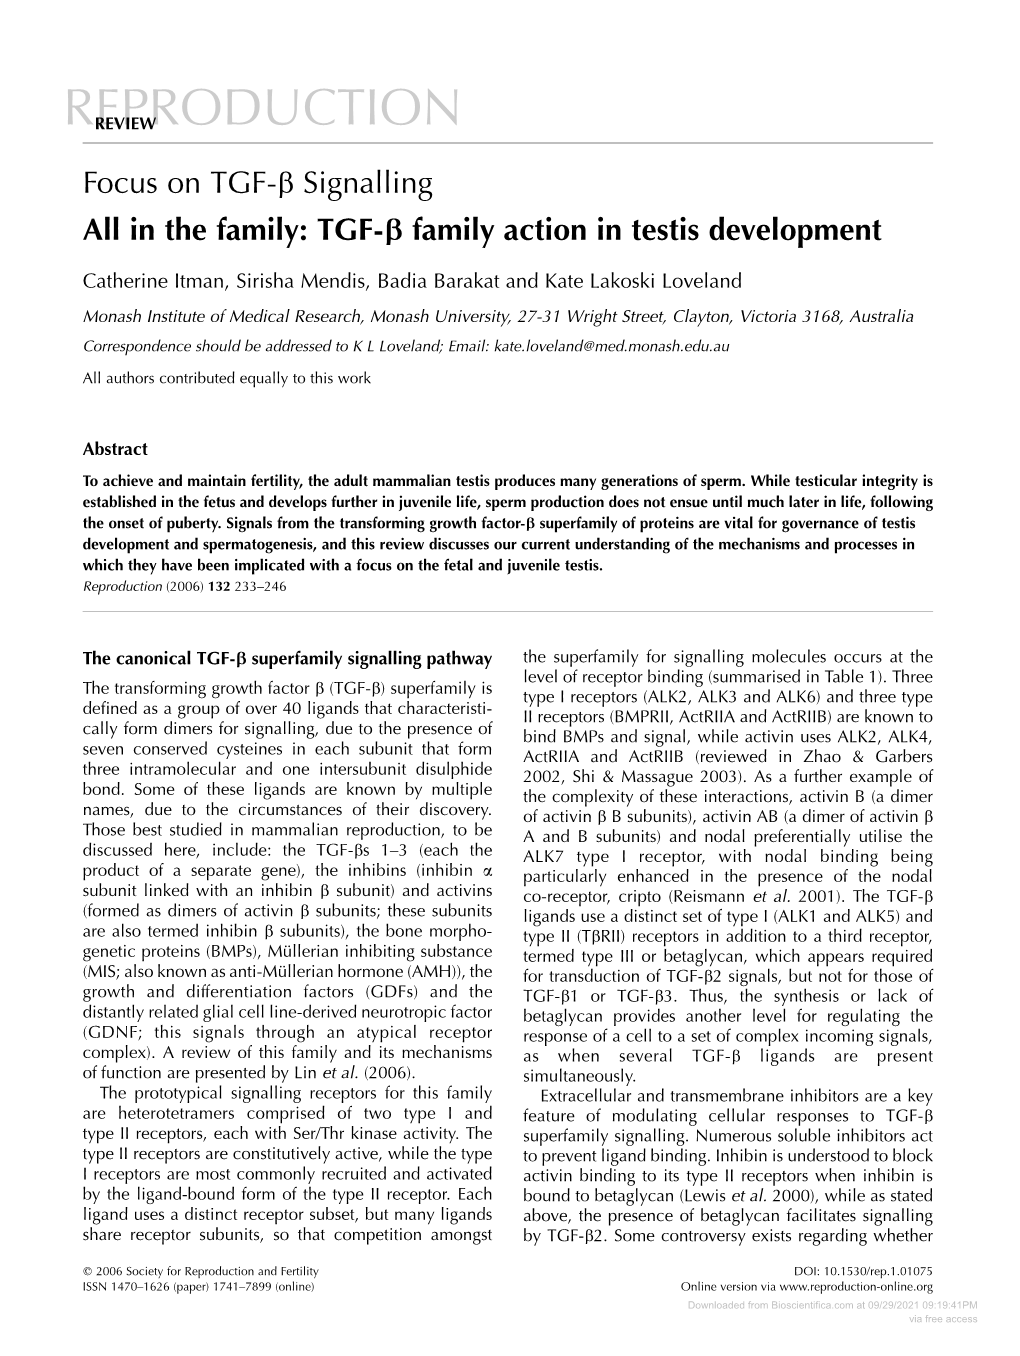 All in the Family: TGF-Β Family Action in Testis Development